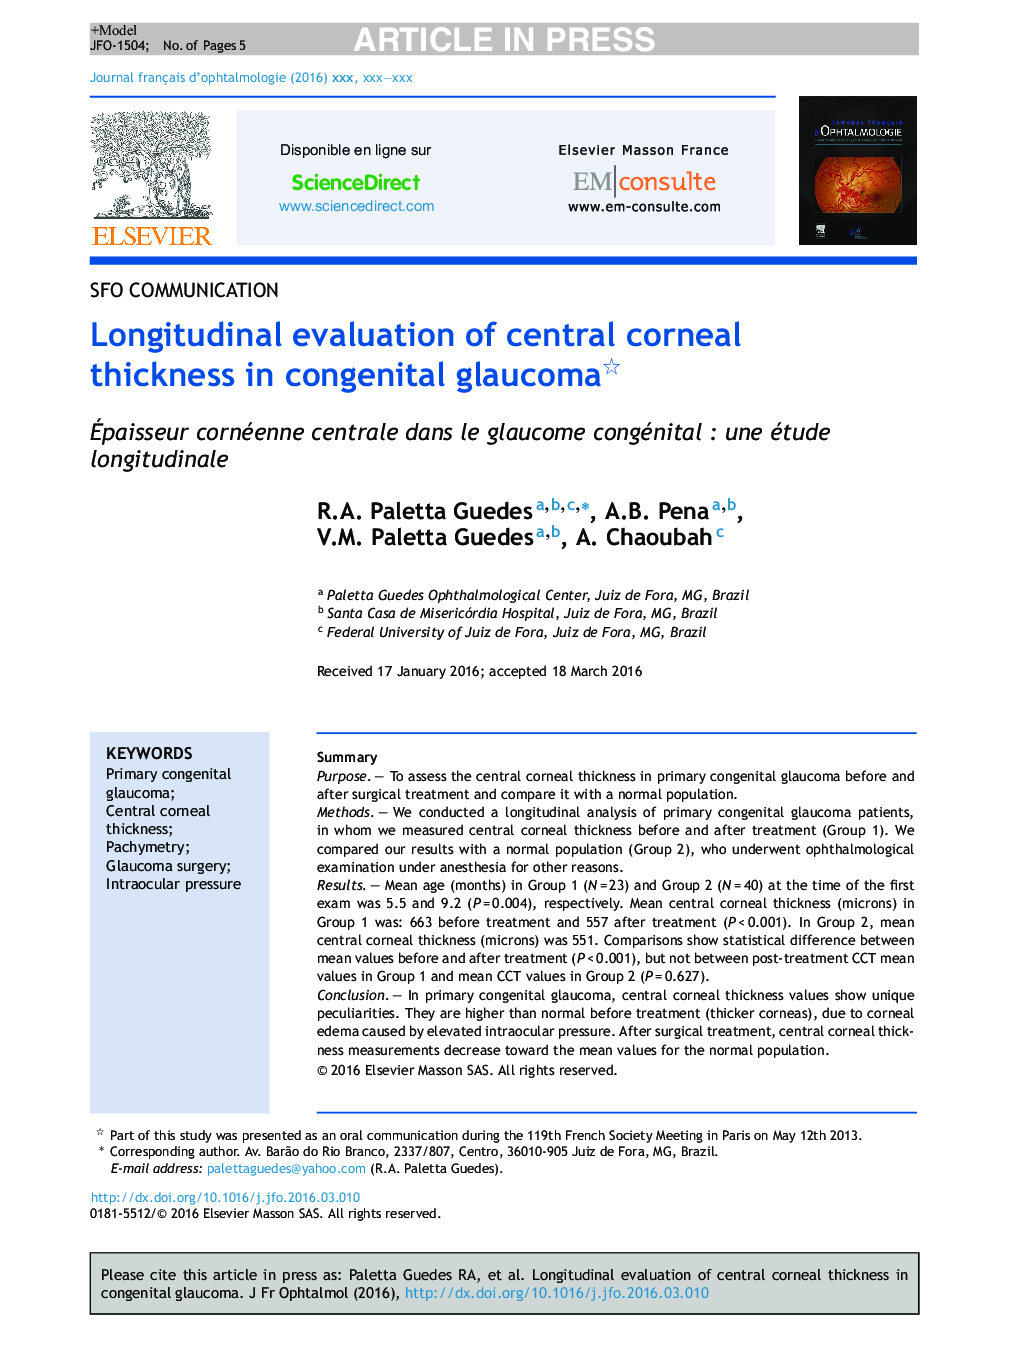 Longitudinal evaluation of central corneal thickness in congenital glaucoma